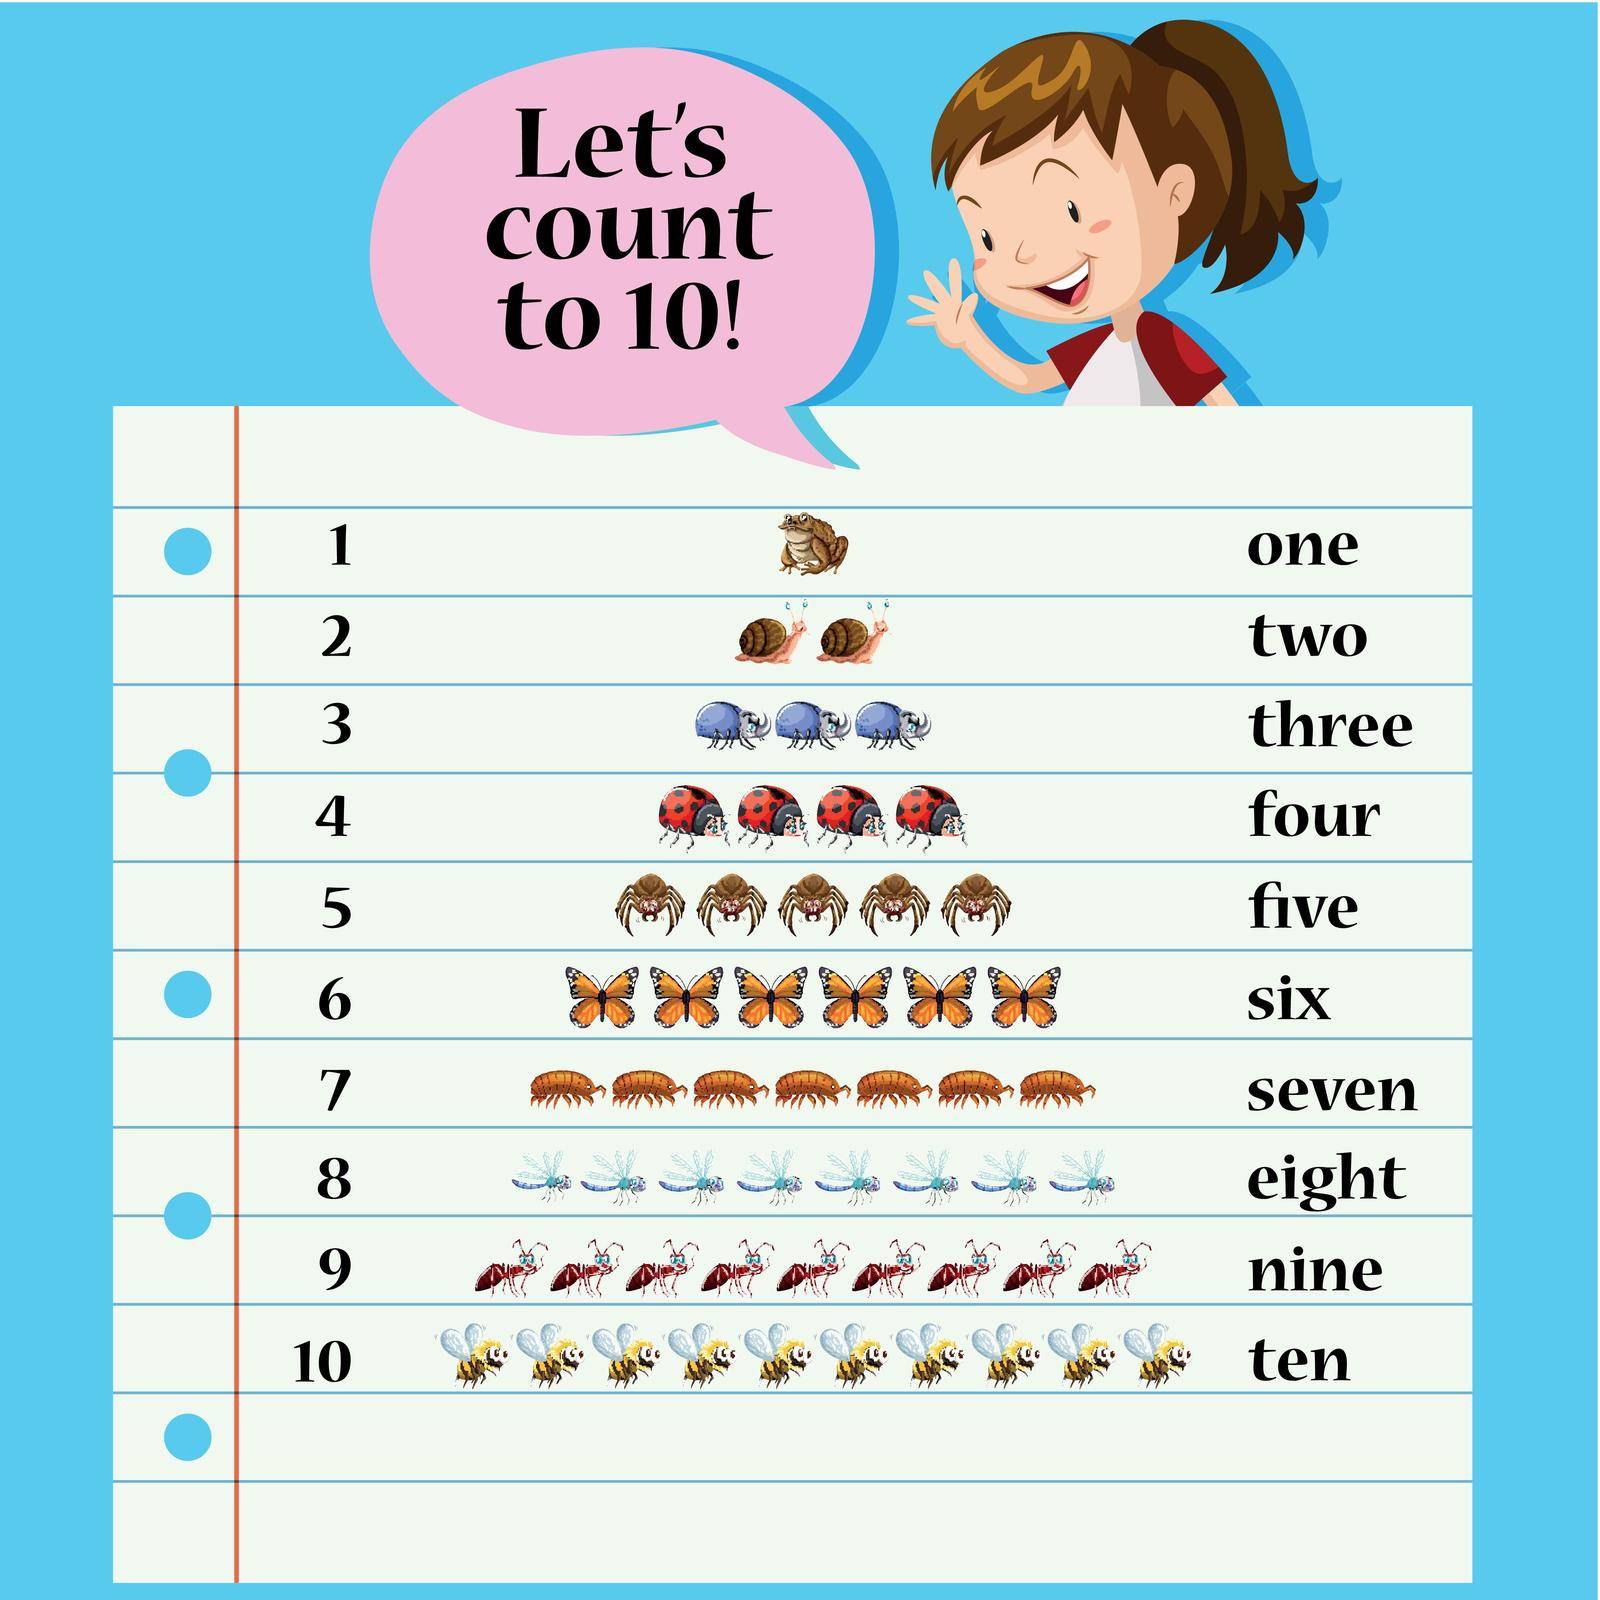 A math counting card illustration